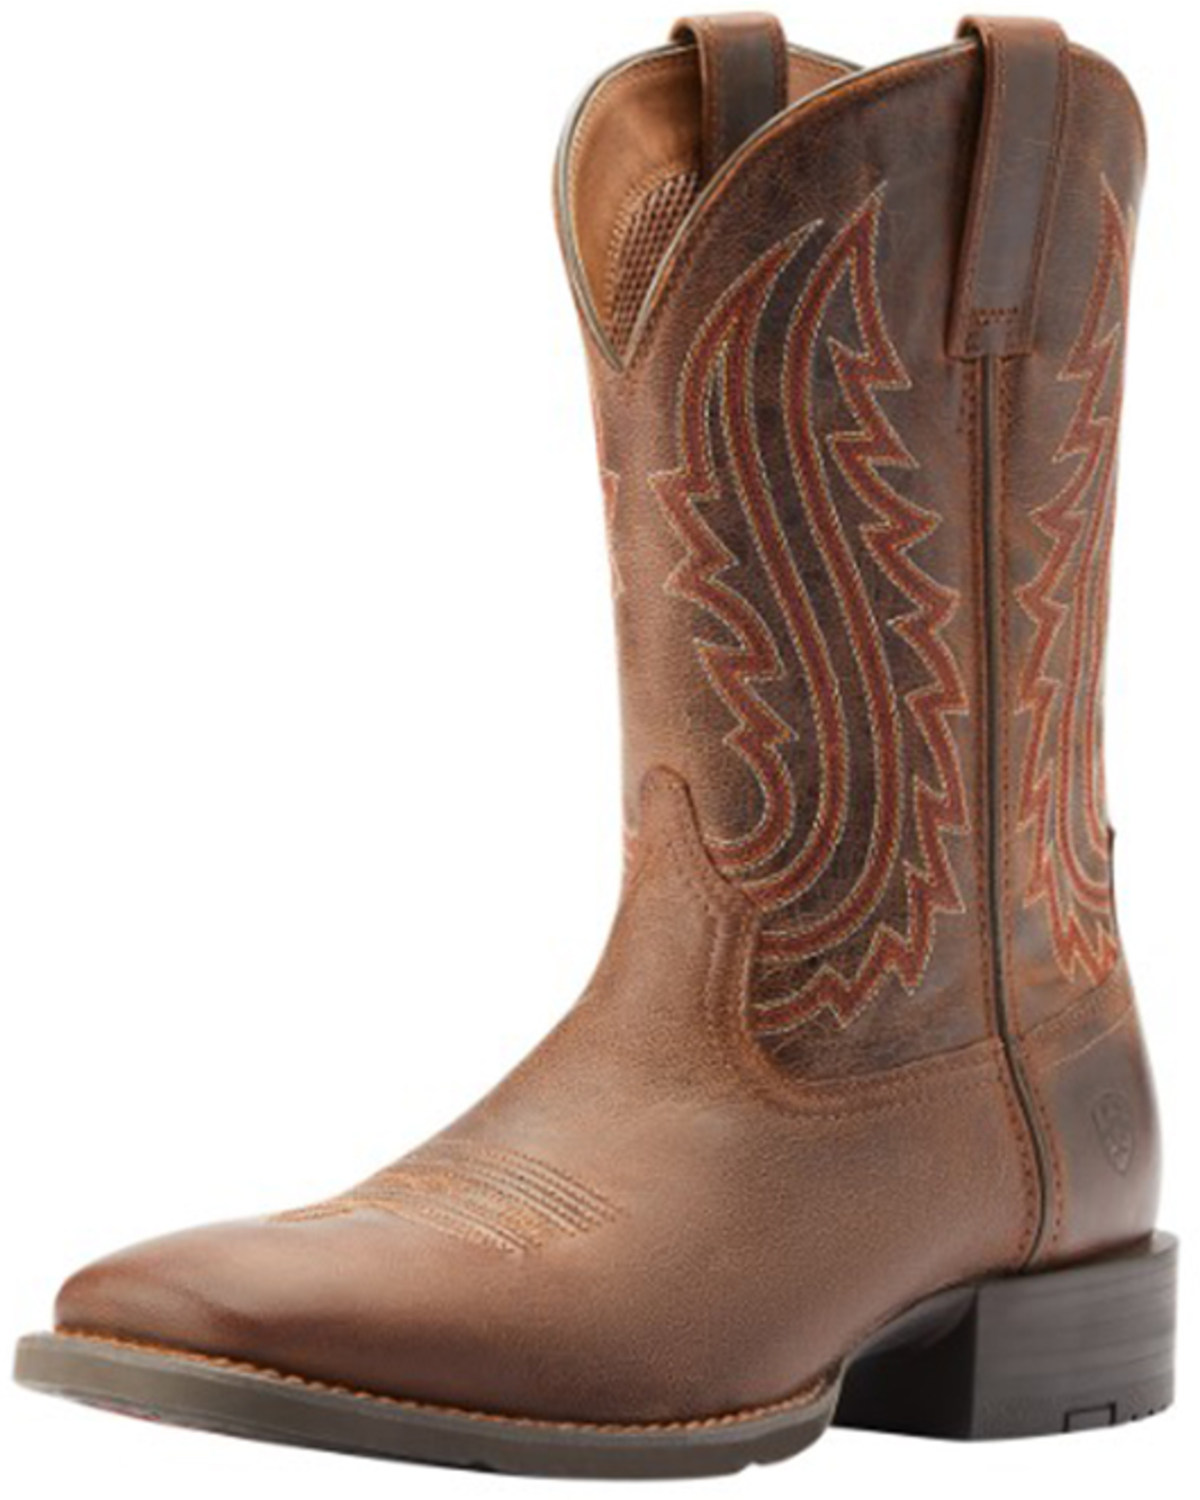 Ariat Men's Sport Big Country Western Performance Boots - Broad Square Toe